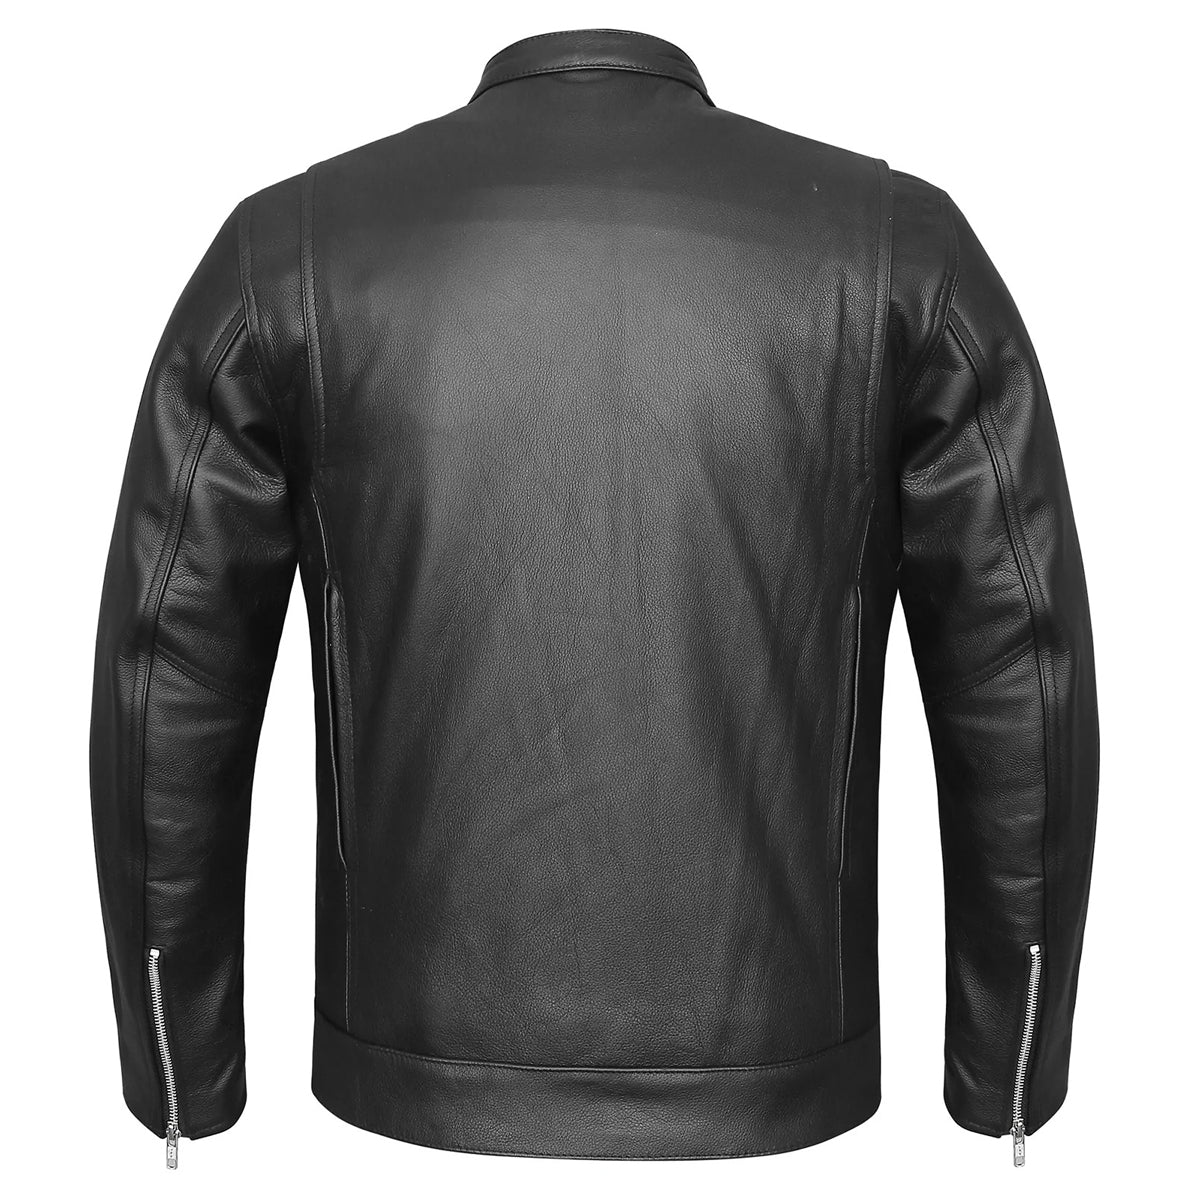 Vance Leathers' Men's Top Performer Motorcycle Leather Jacket with Double Conceal Carry Pockets